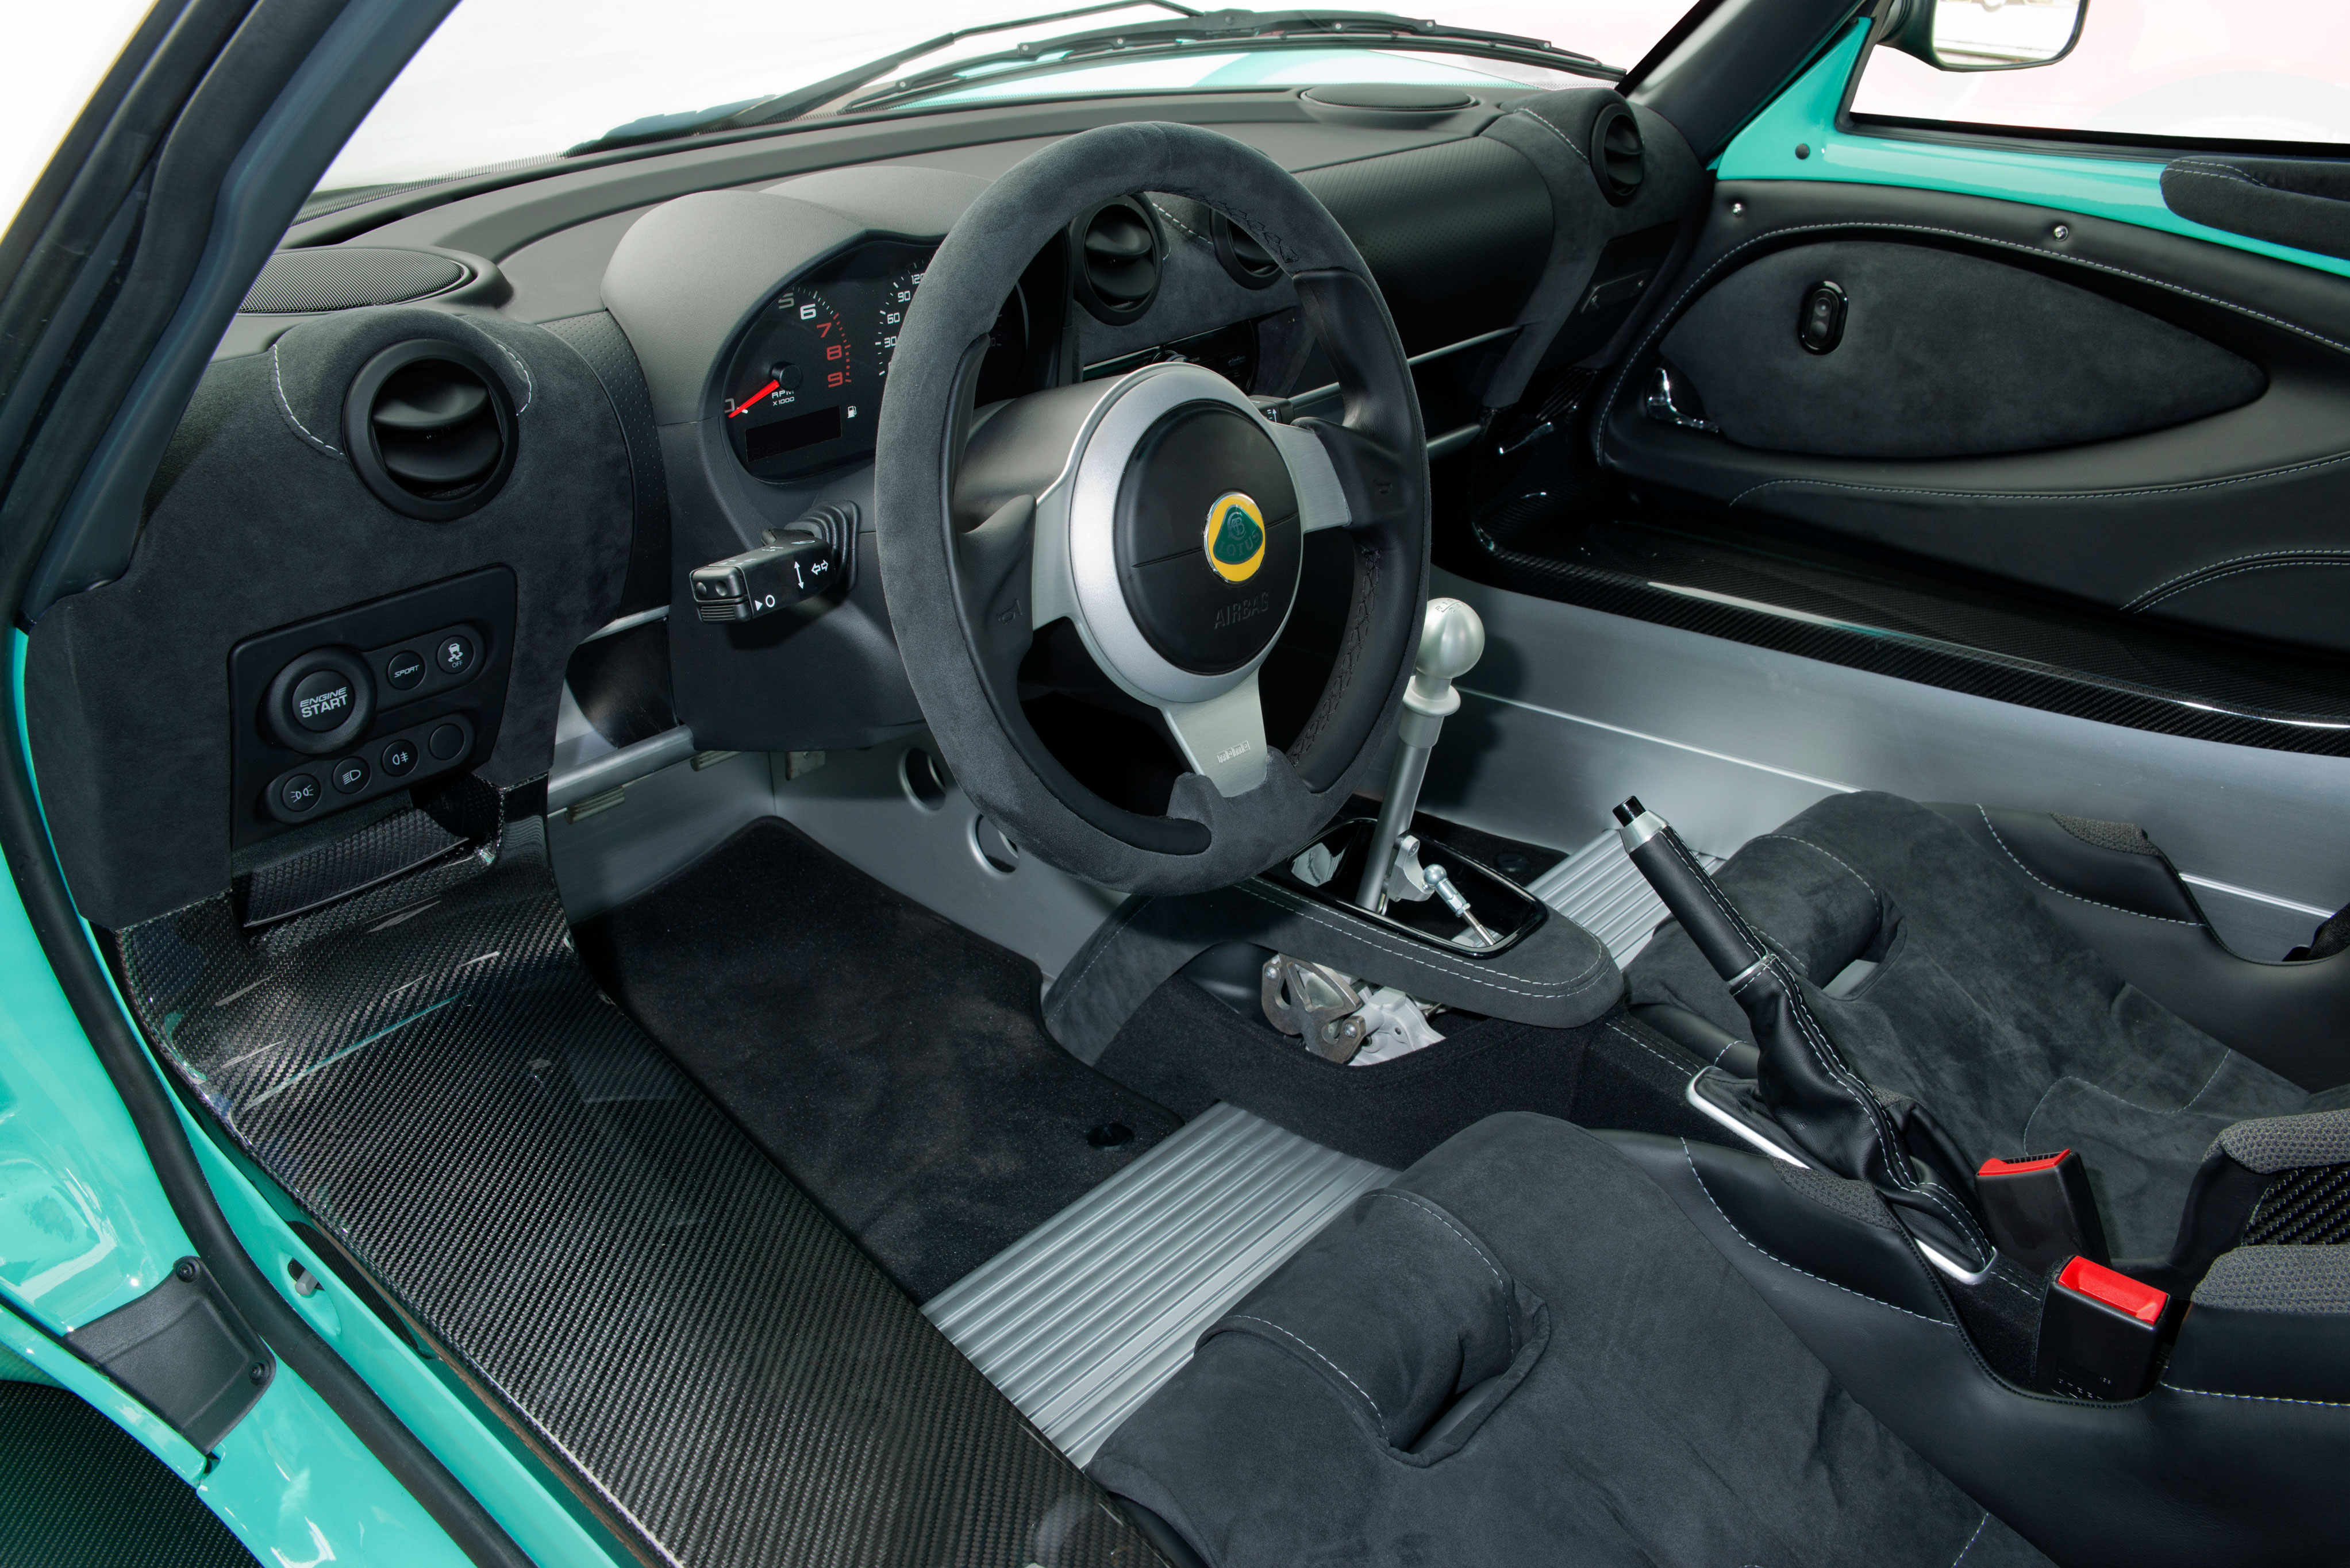 lotus elise review is the featherweight sports car as good as ever interior and tech evo lotus elise review is the featherweight sports car as good as ever interior and tech evo